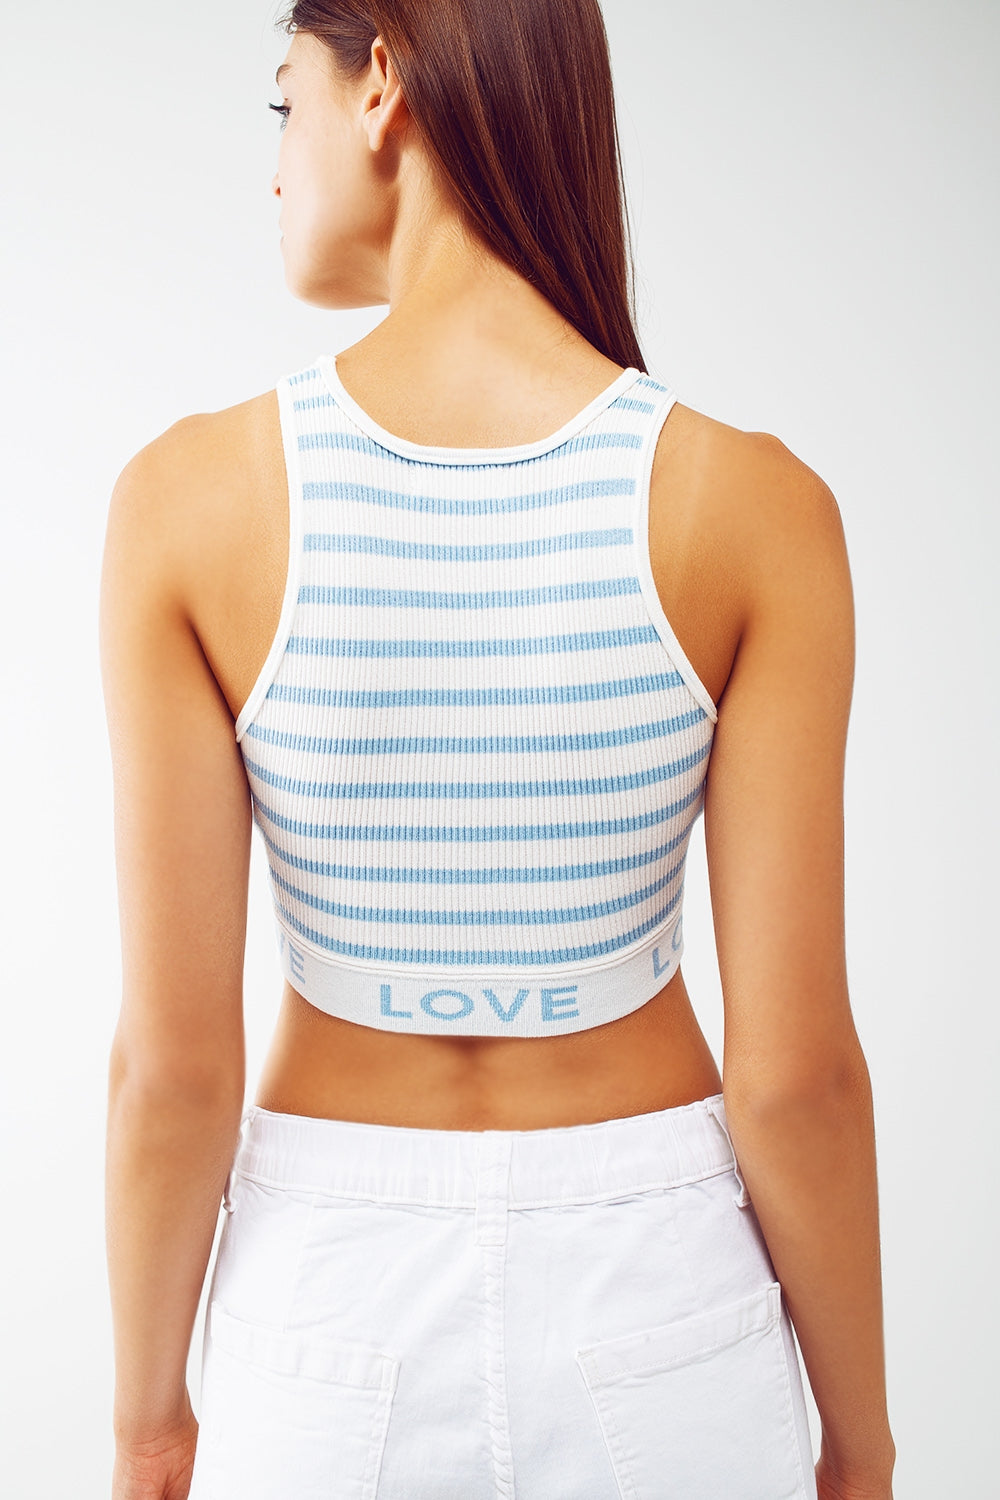 Striped Cropped Top with Love Text in blue - Szua Store